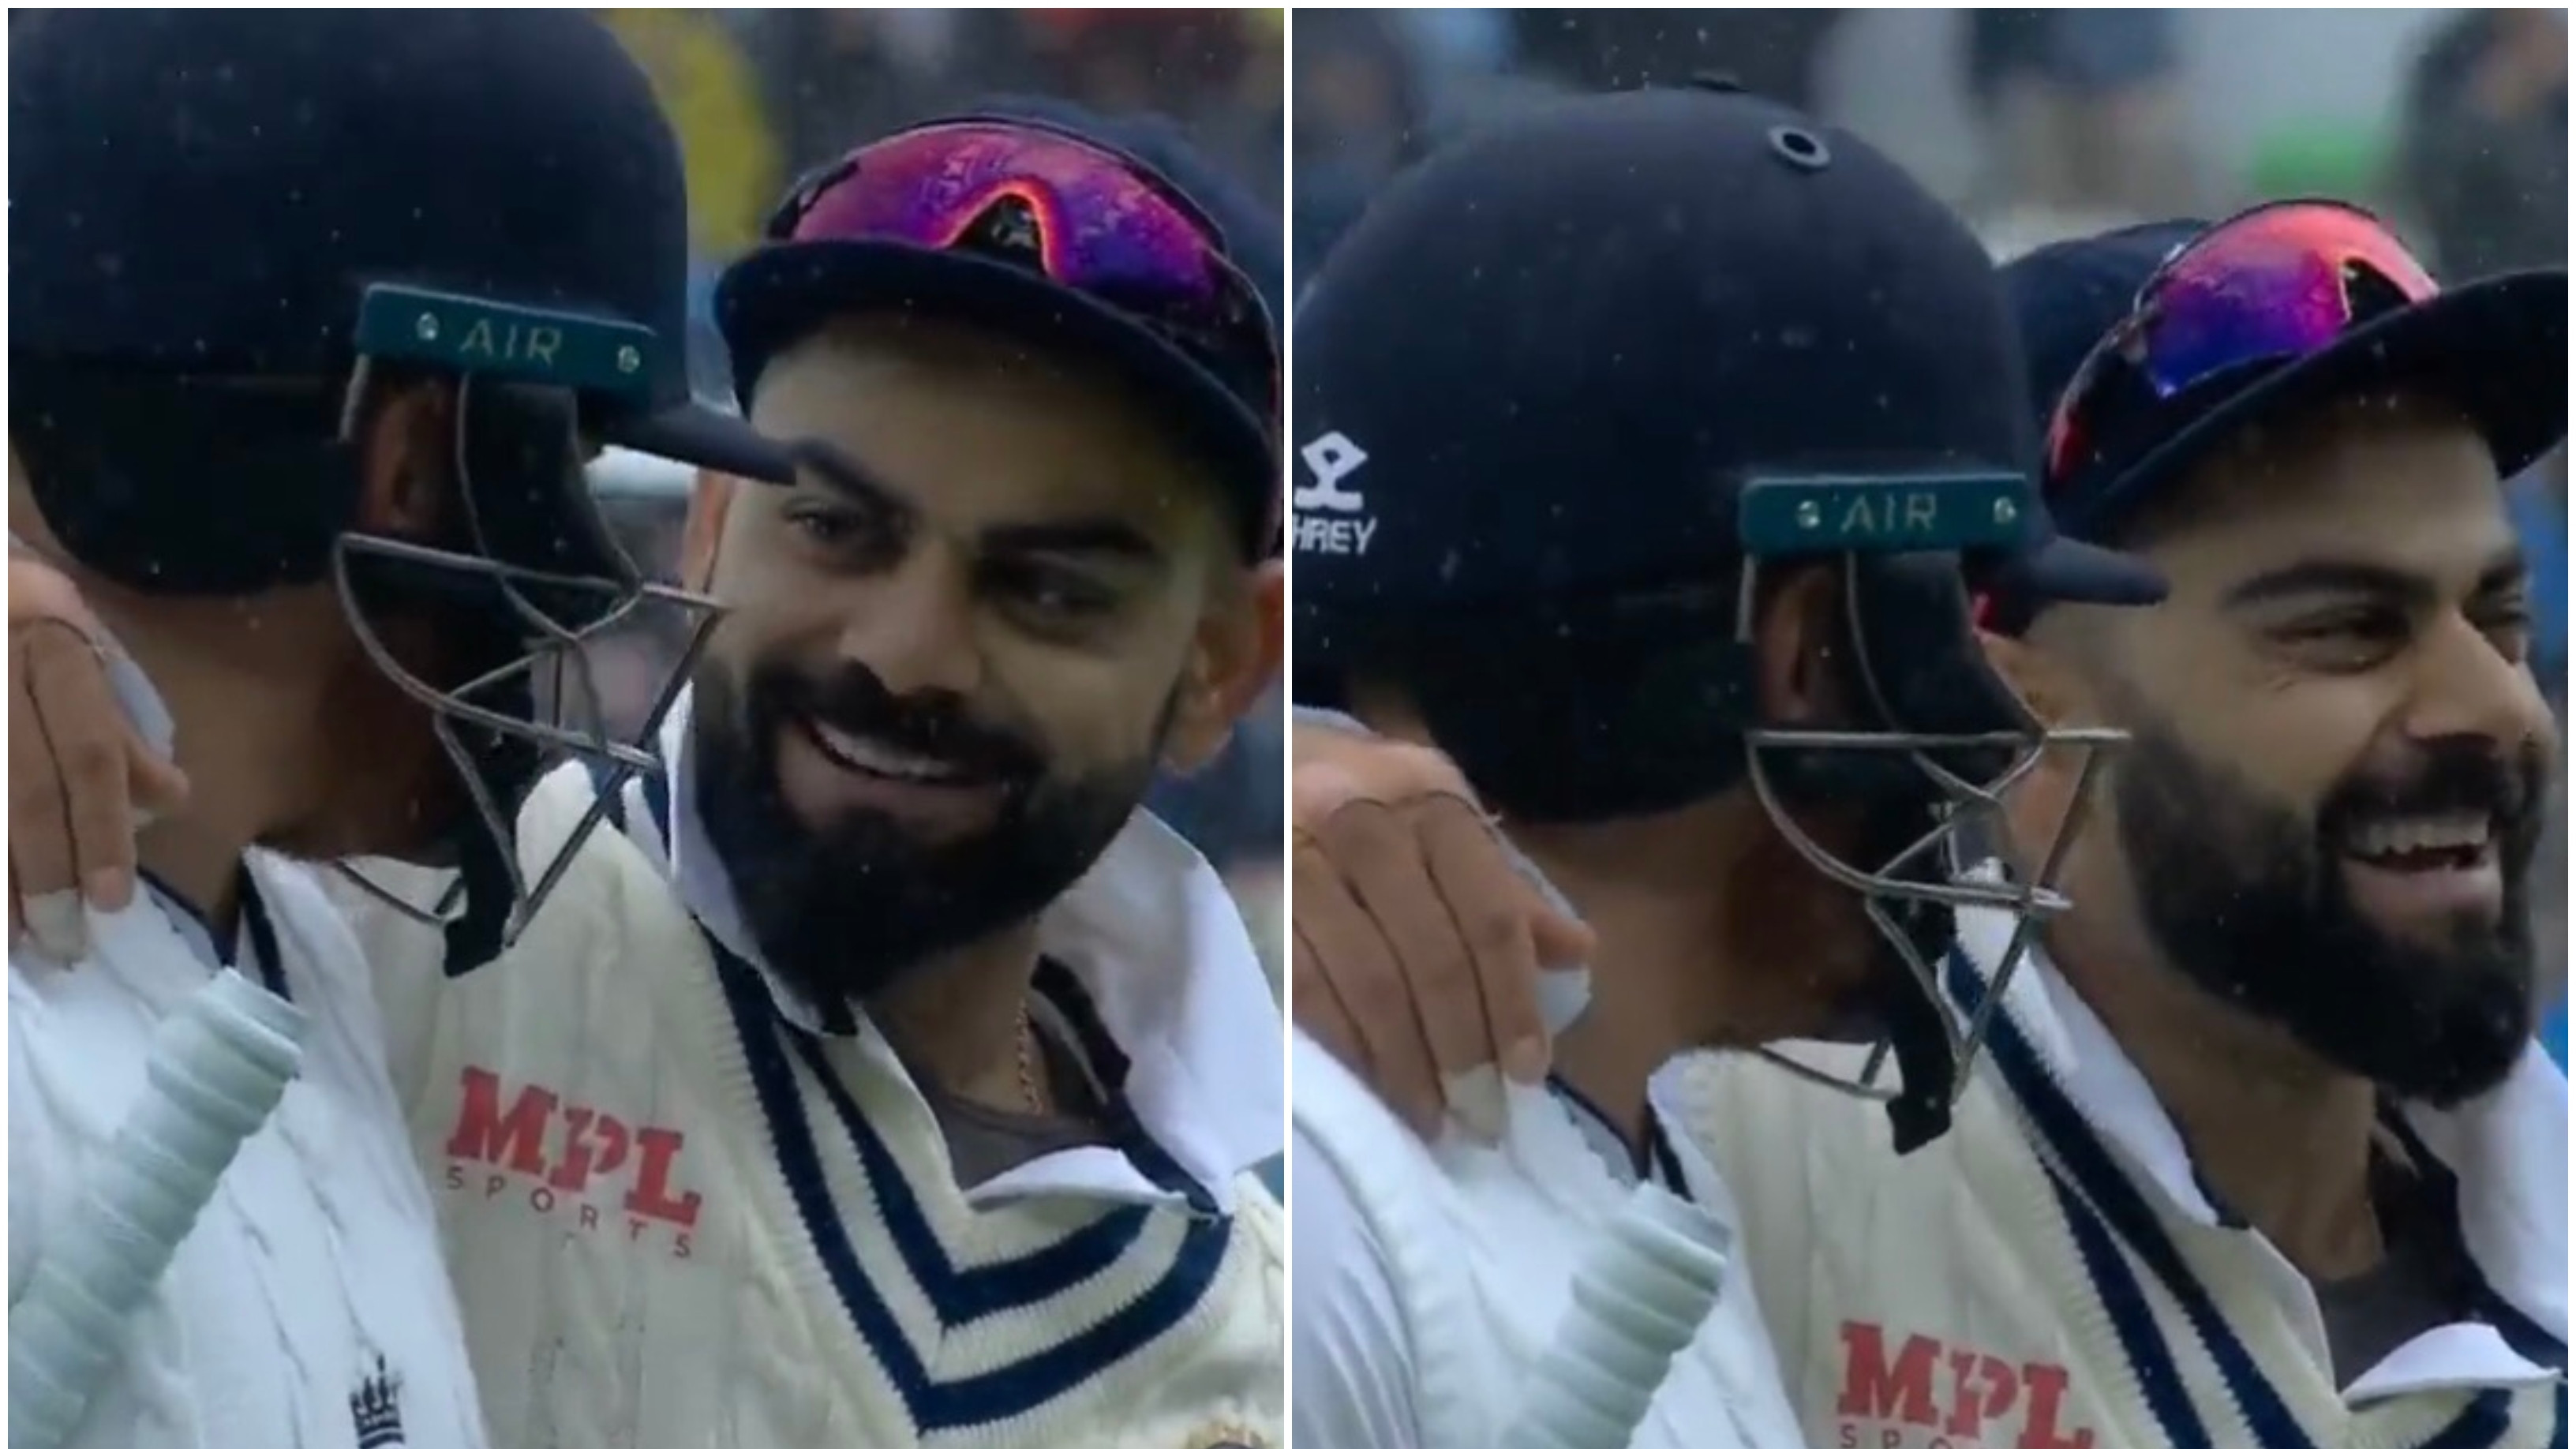 ENG v IND 2022: WATCH – Kohli’s heartfelt conversation with Bairstow as they walk off the field during rain interruption